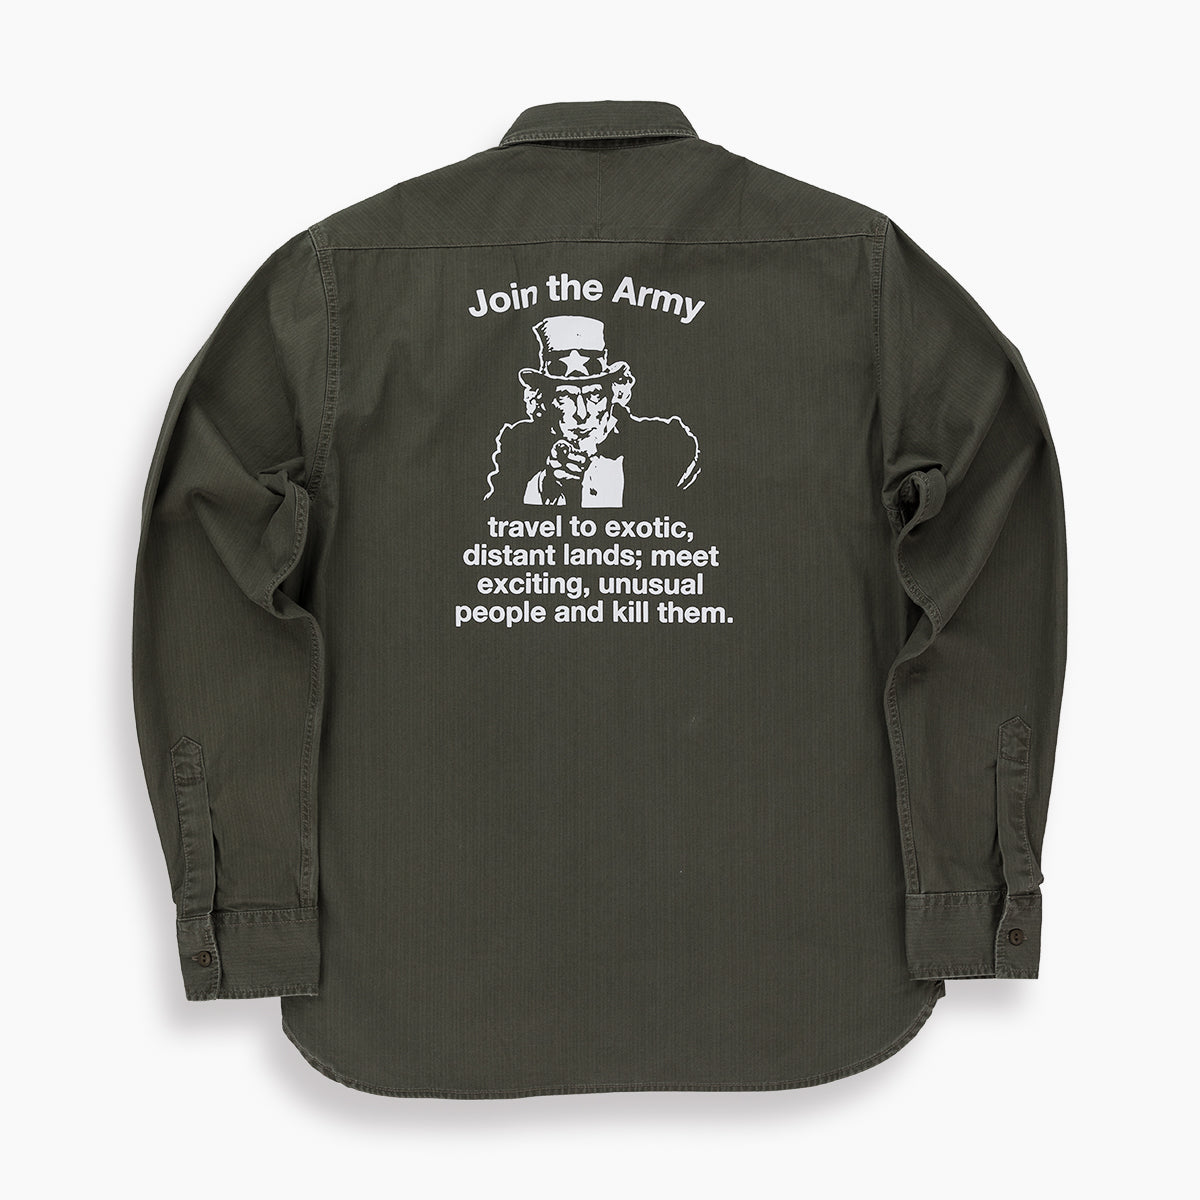 JOIN THE ARMY SHIRT